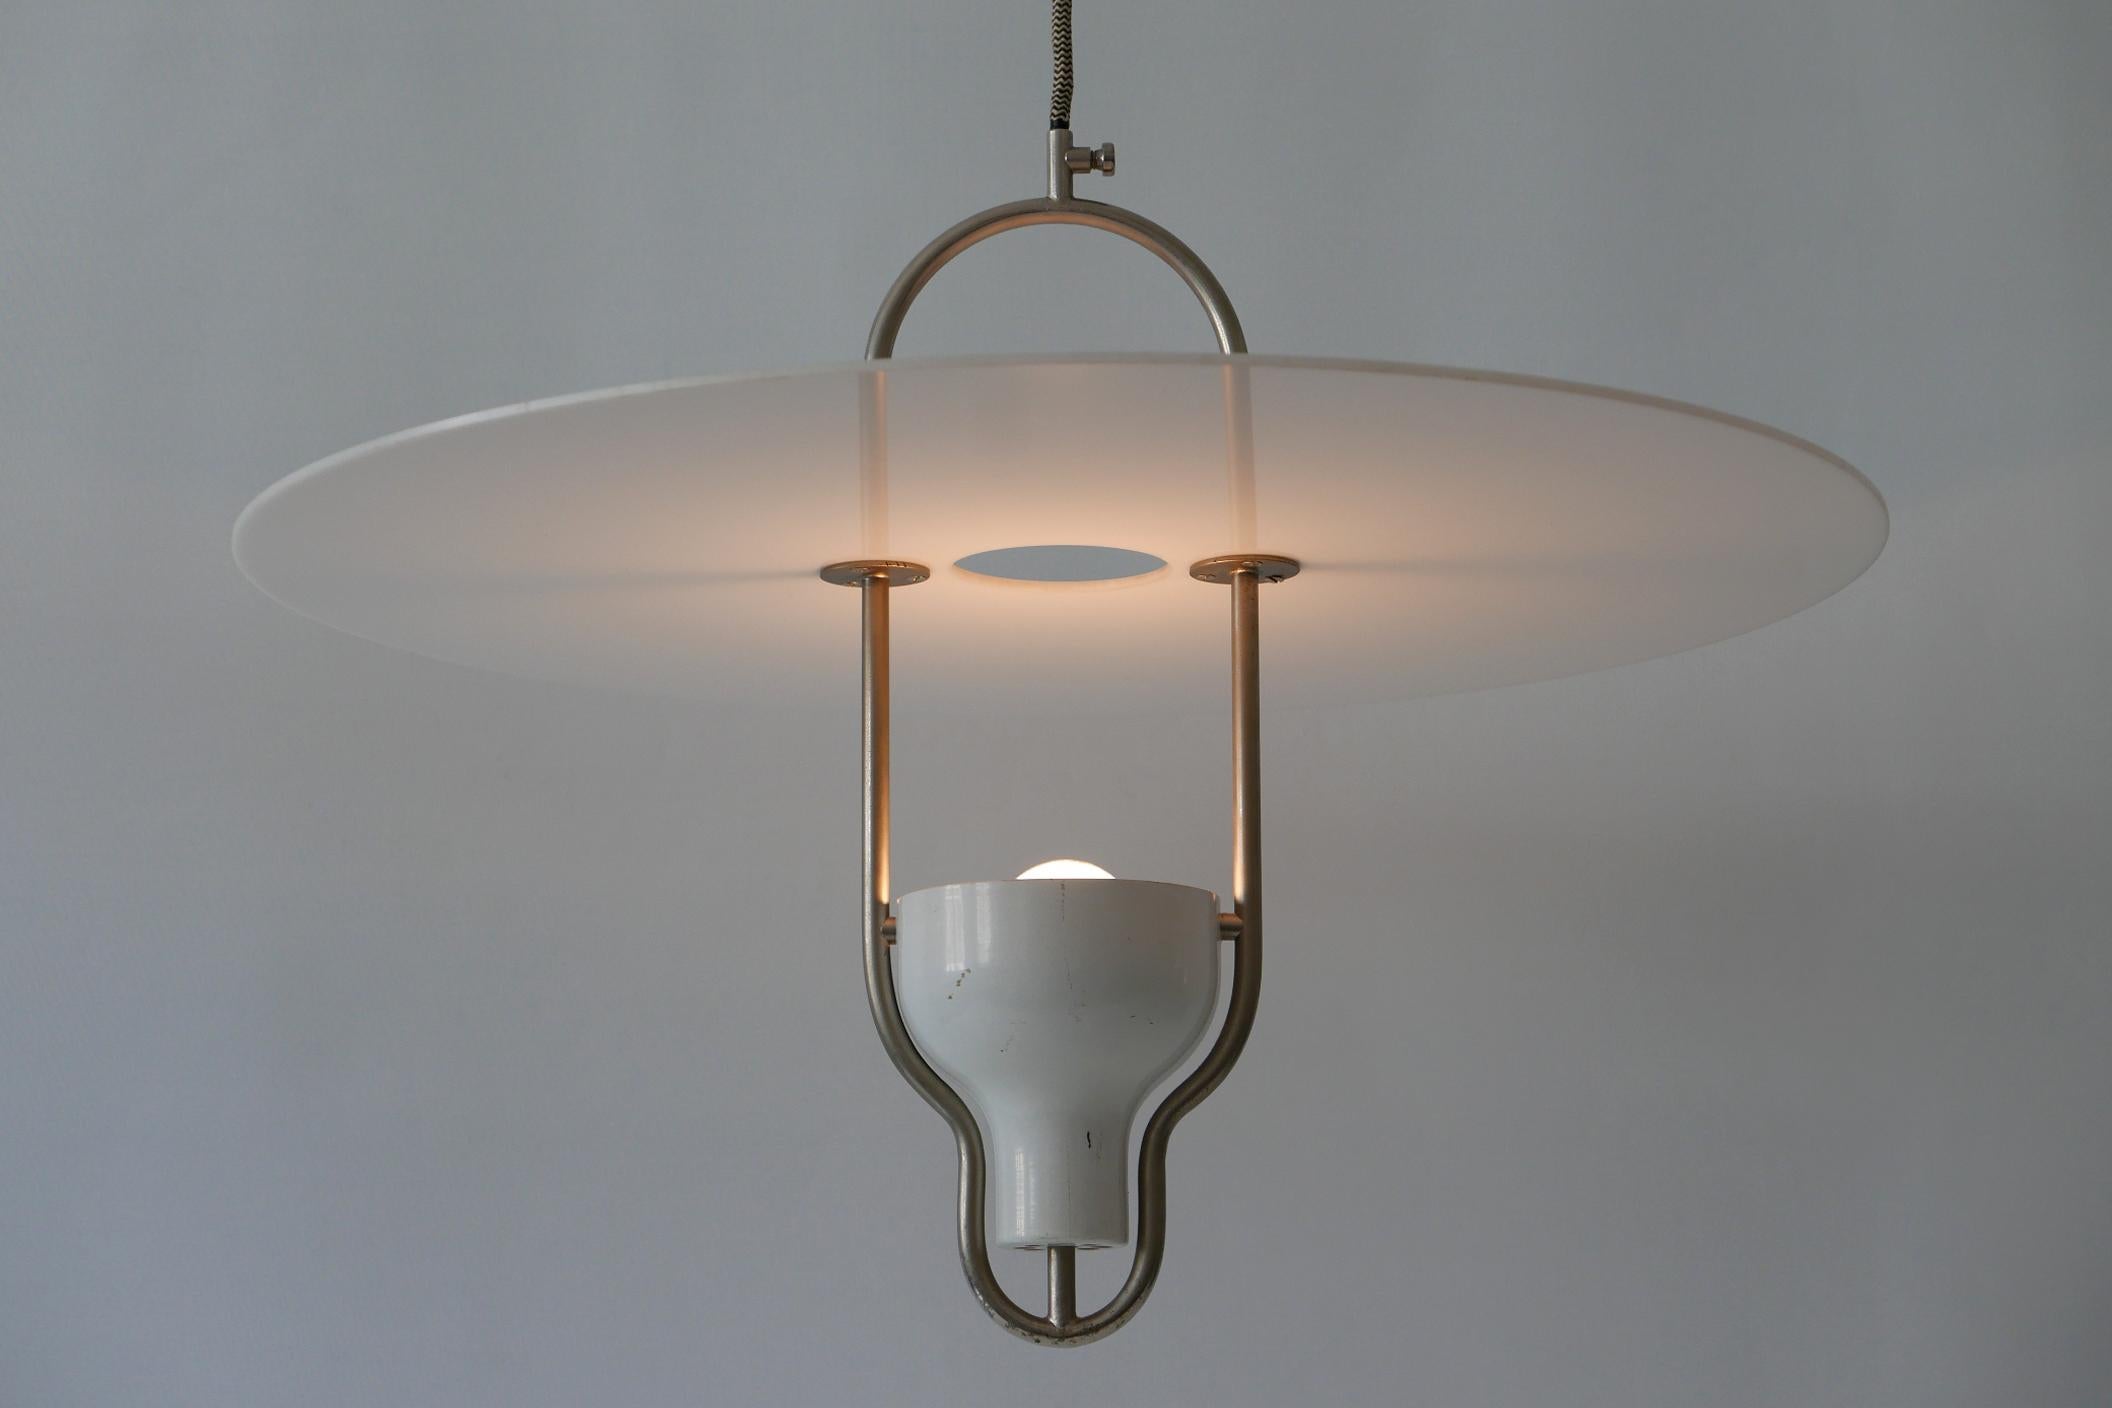 Exceptional Mid-Century Modern Ufo Pendant Lamp, Italy, 1960s For Sale 5